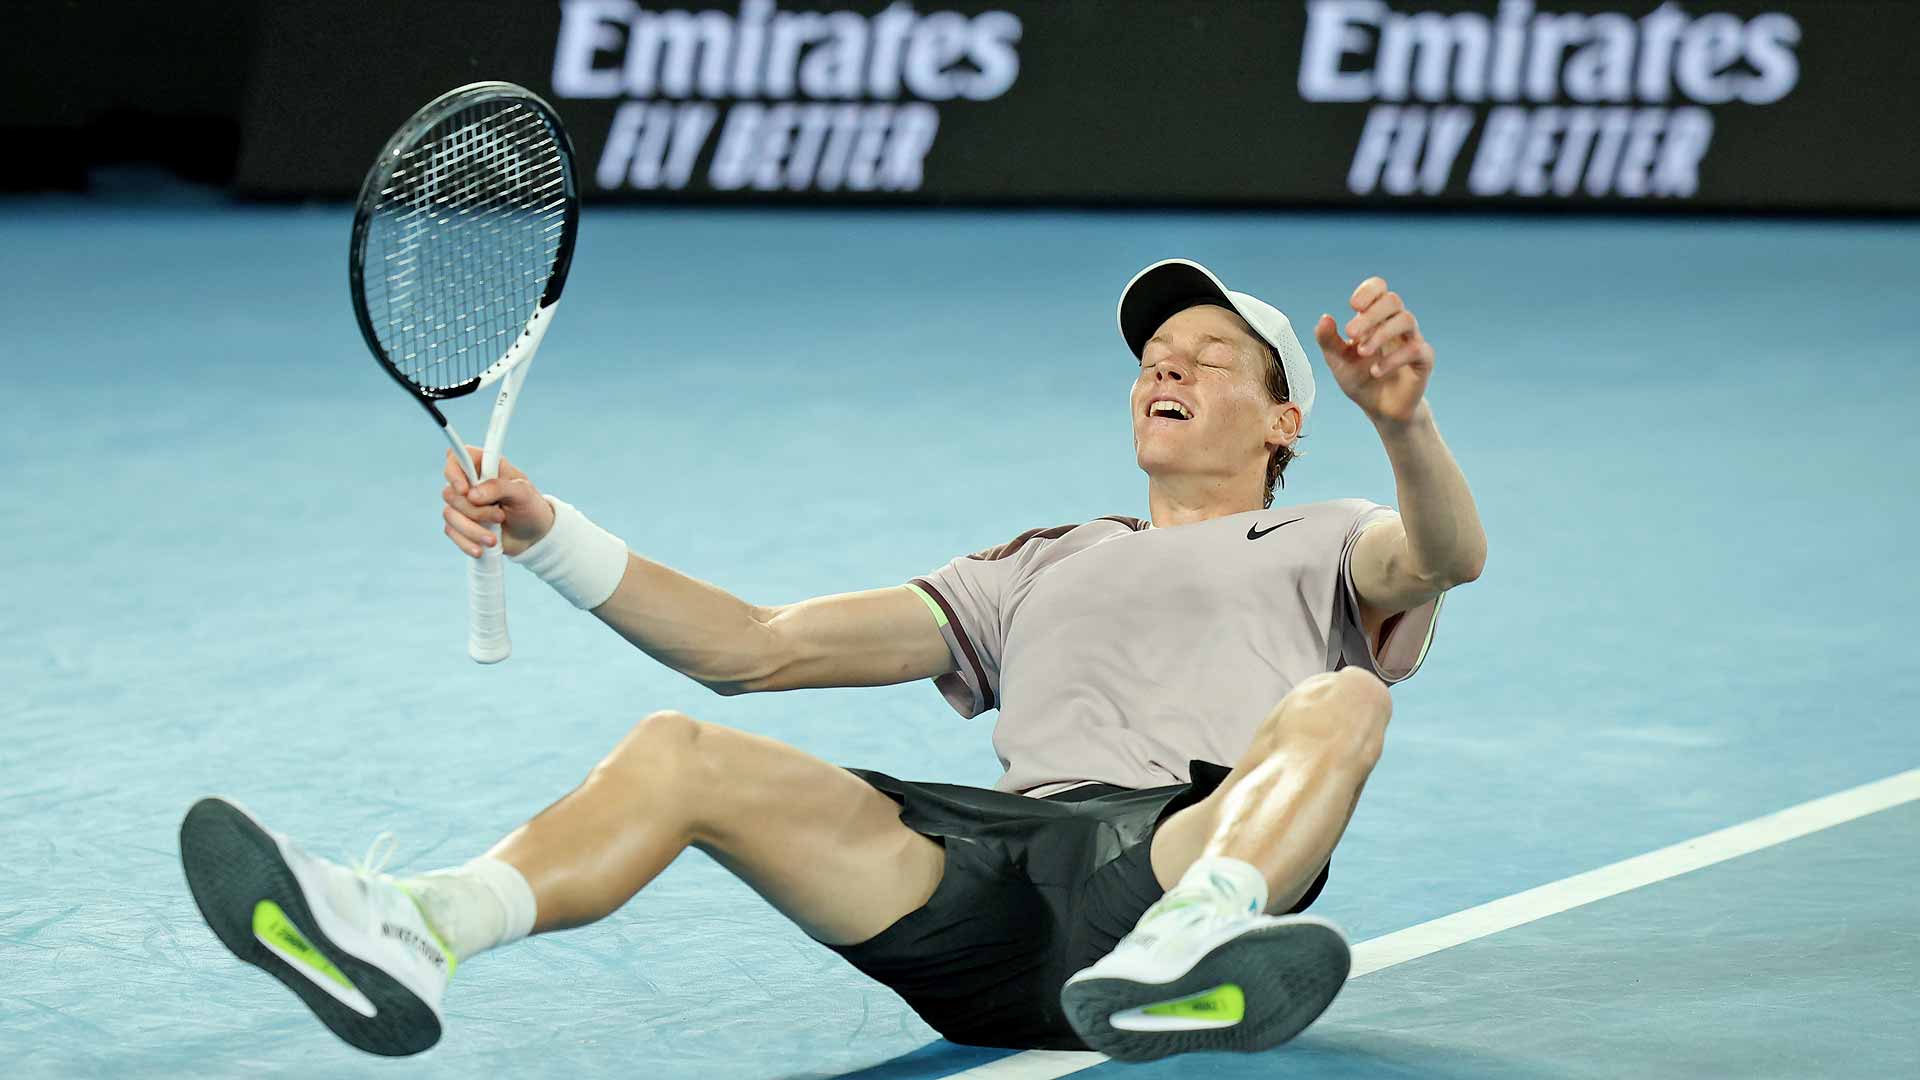 Sinner rallies from two sets down to win Australian Open title